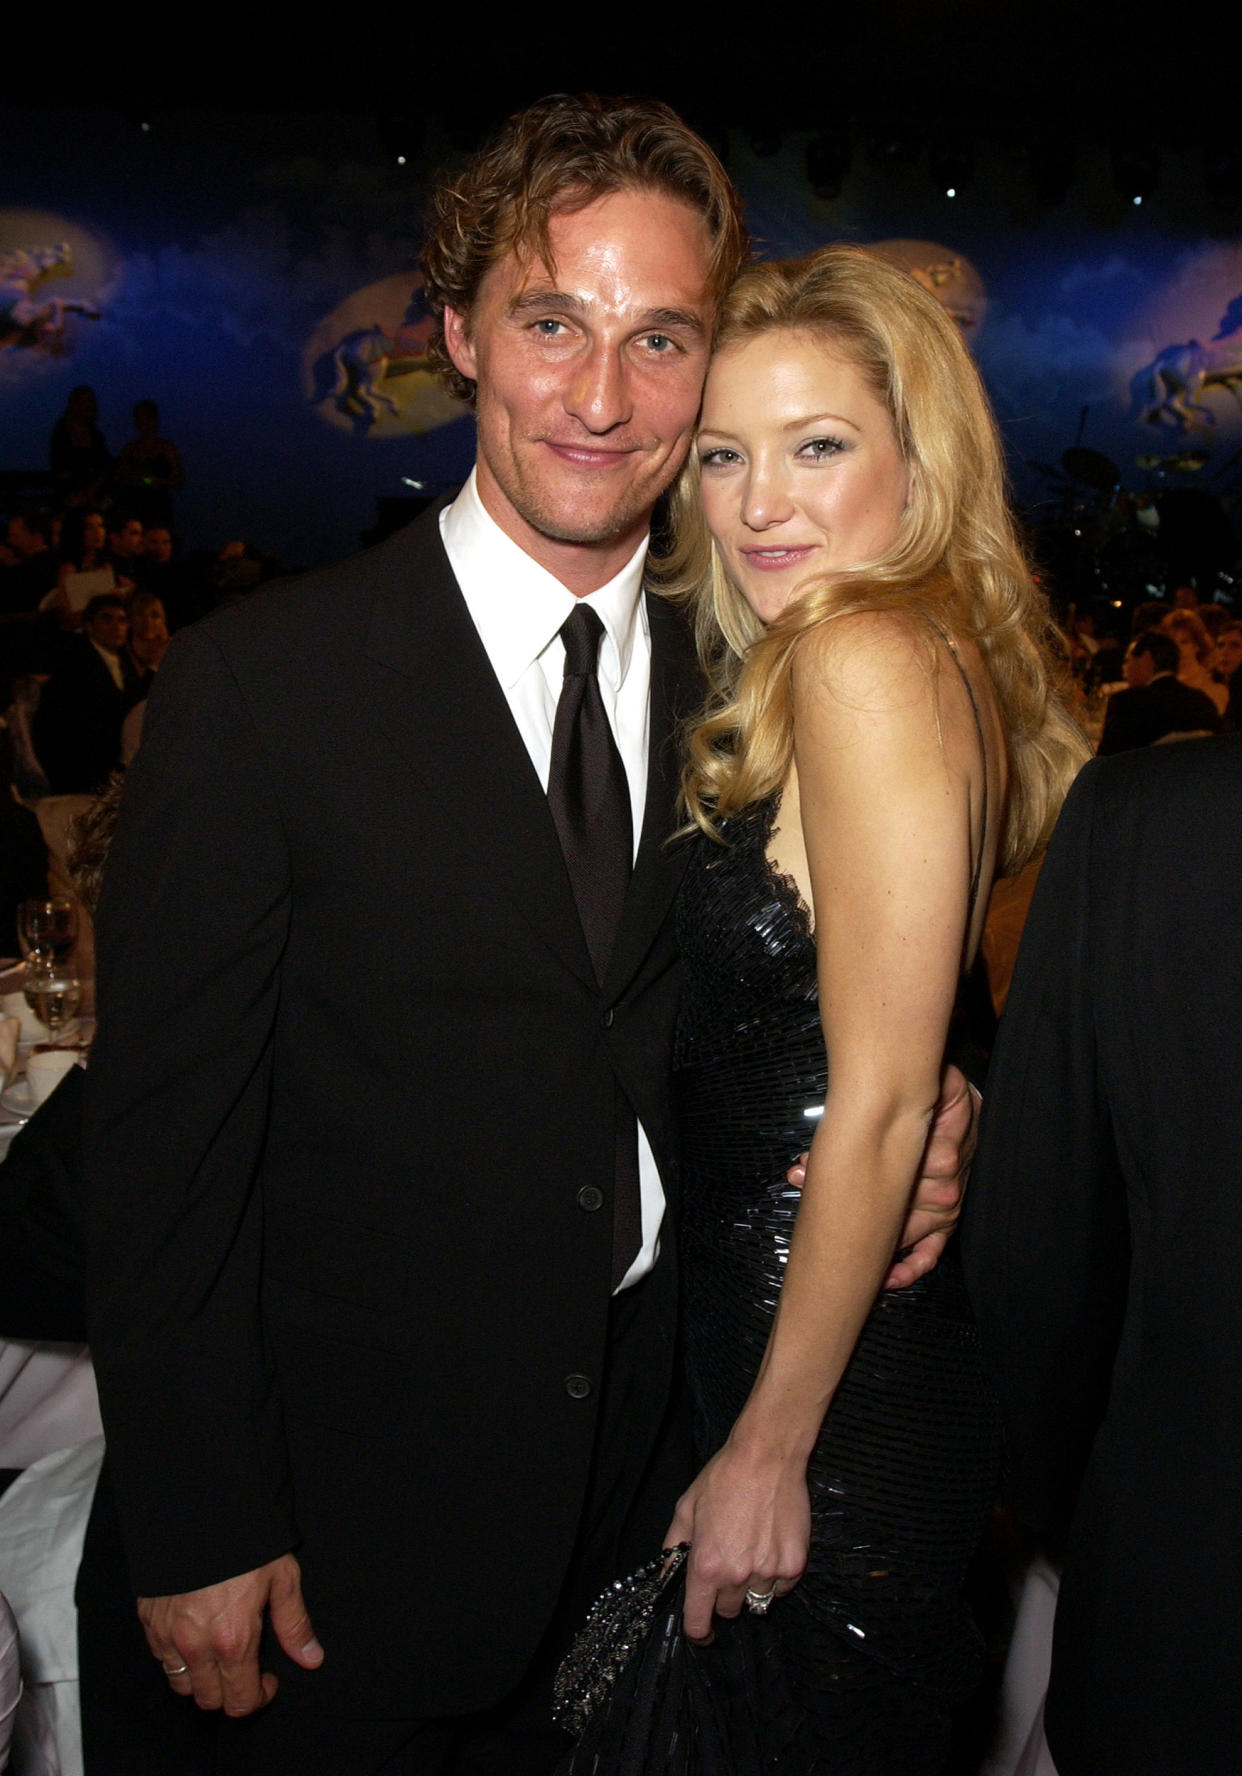 Matthew McConaughey and Kate Hudson at The 15th Carousel Of Hope Ball  on Oct. 15, 2002. (Michael Caulfield Archive / WireImage)